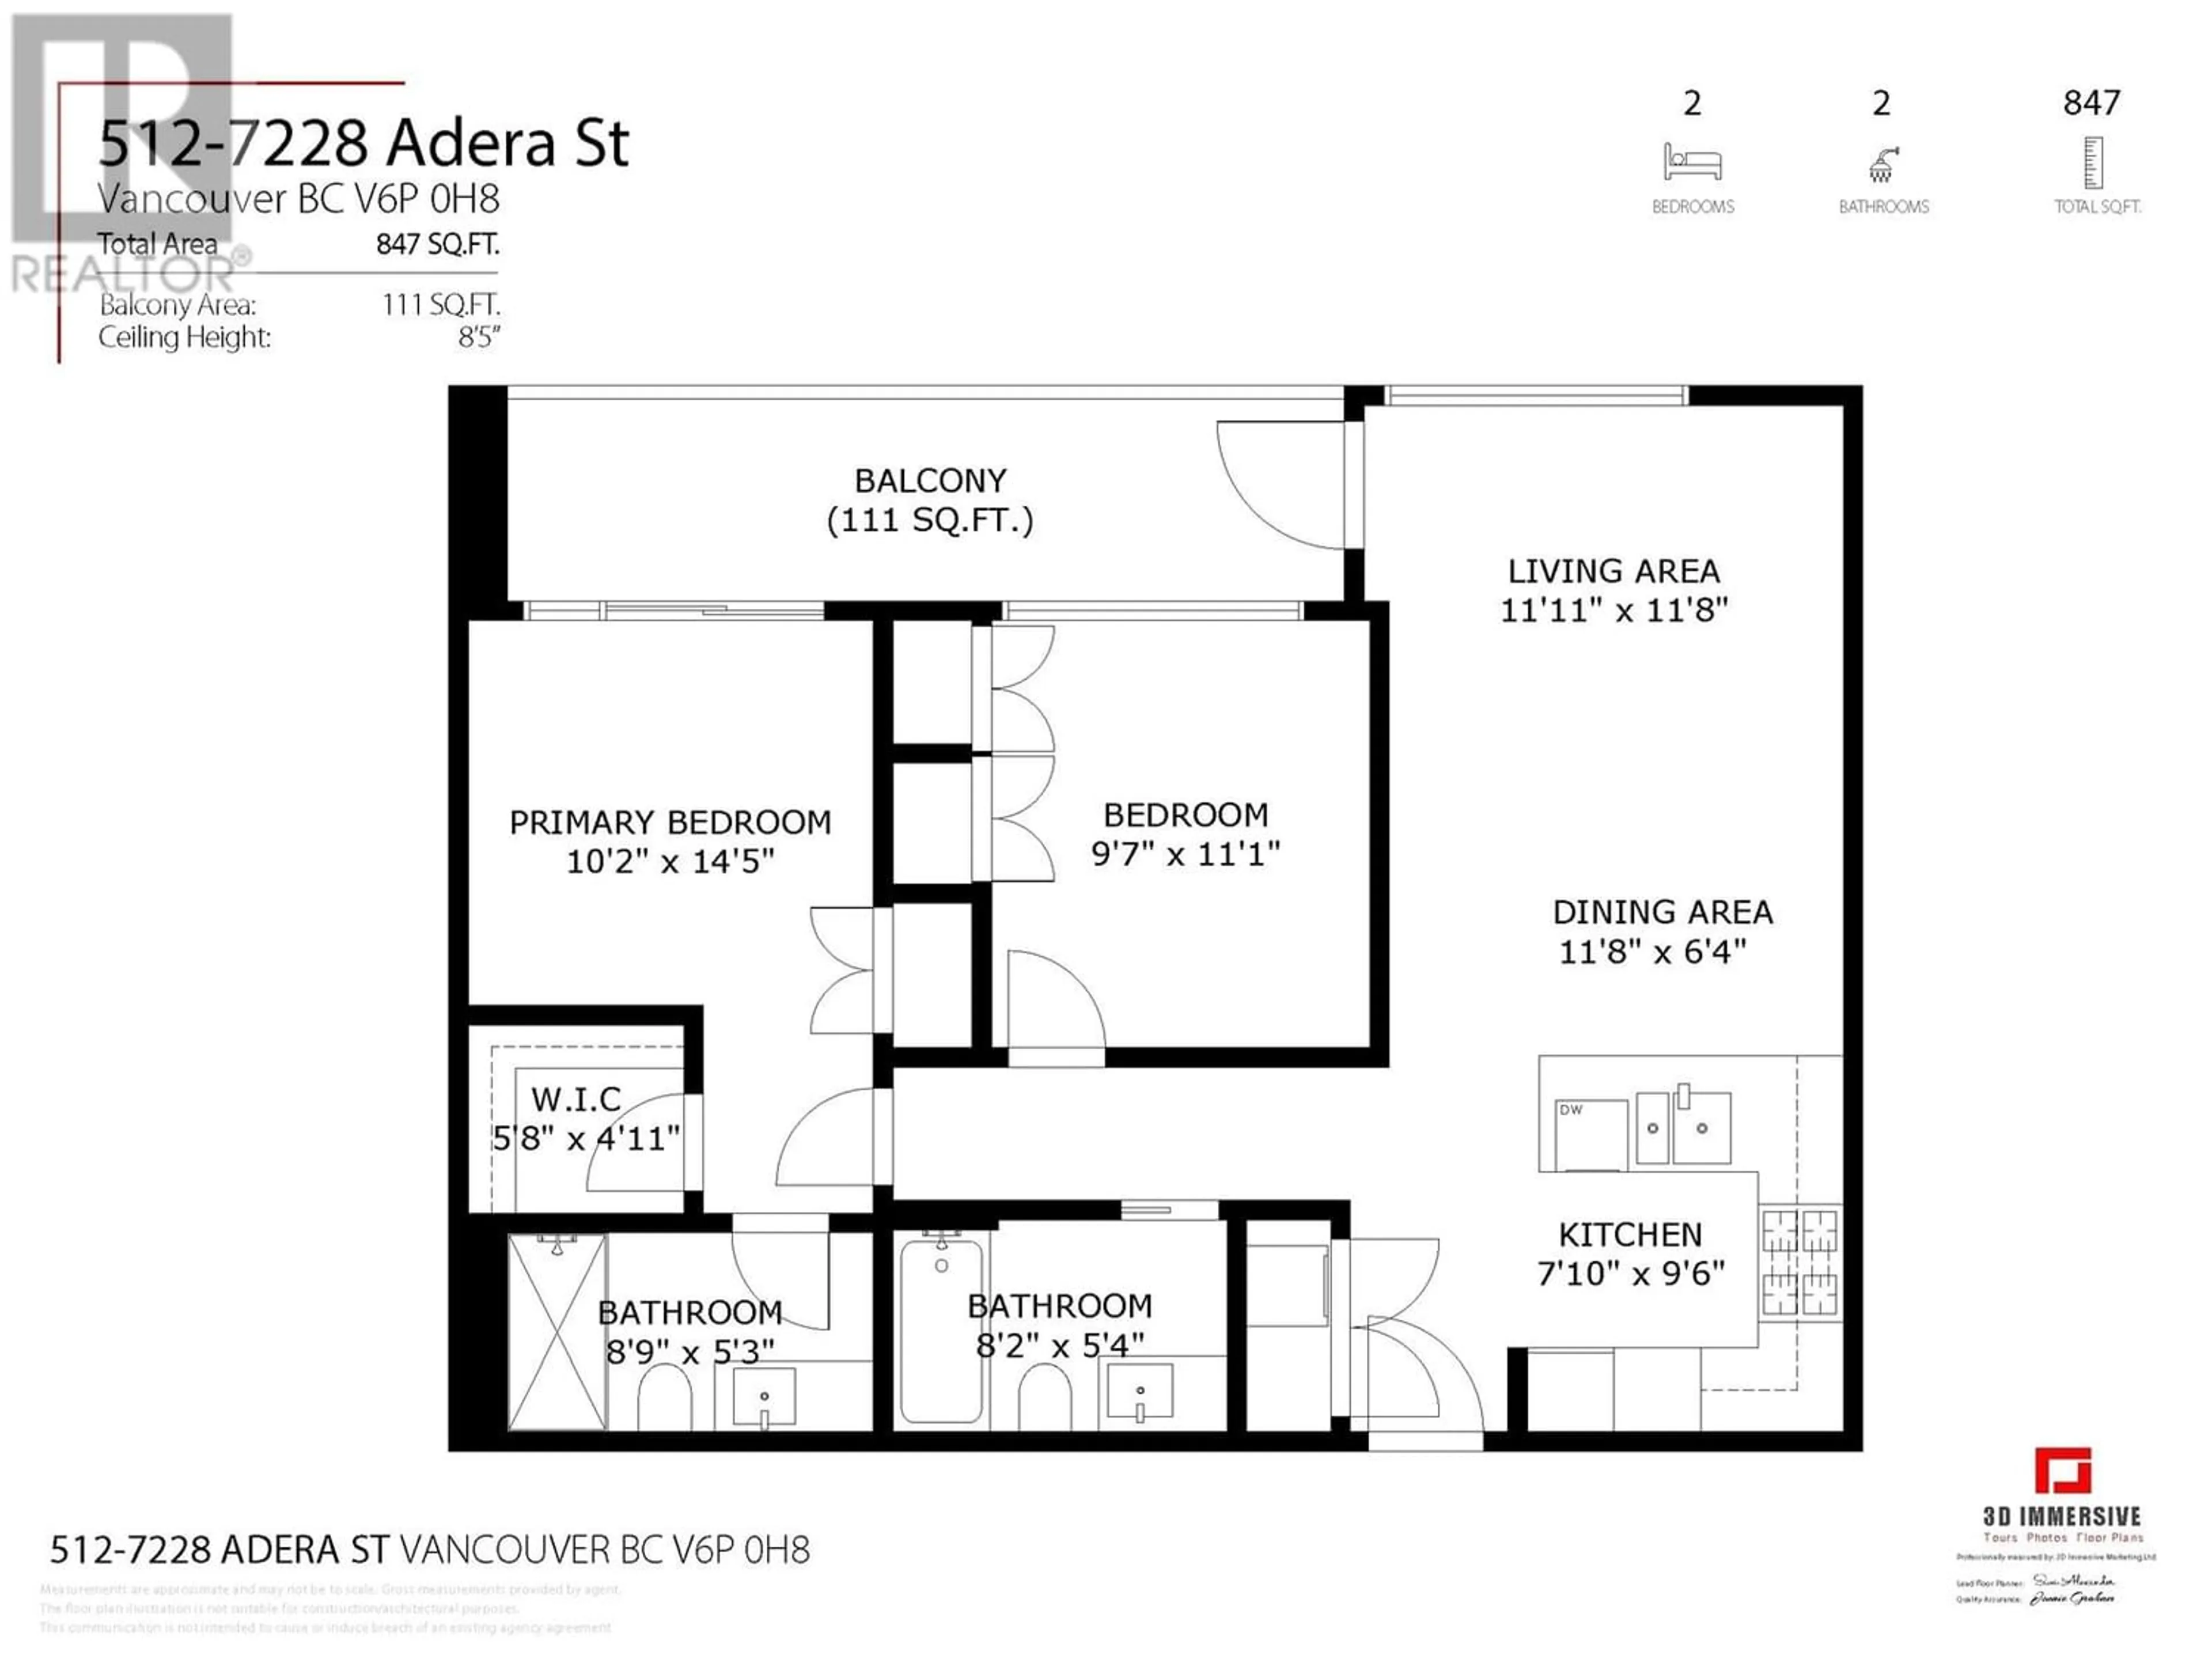 Floor plan for 512 7228 ADERA STREET, Vancouver British Columbia V6P0H8